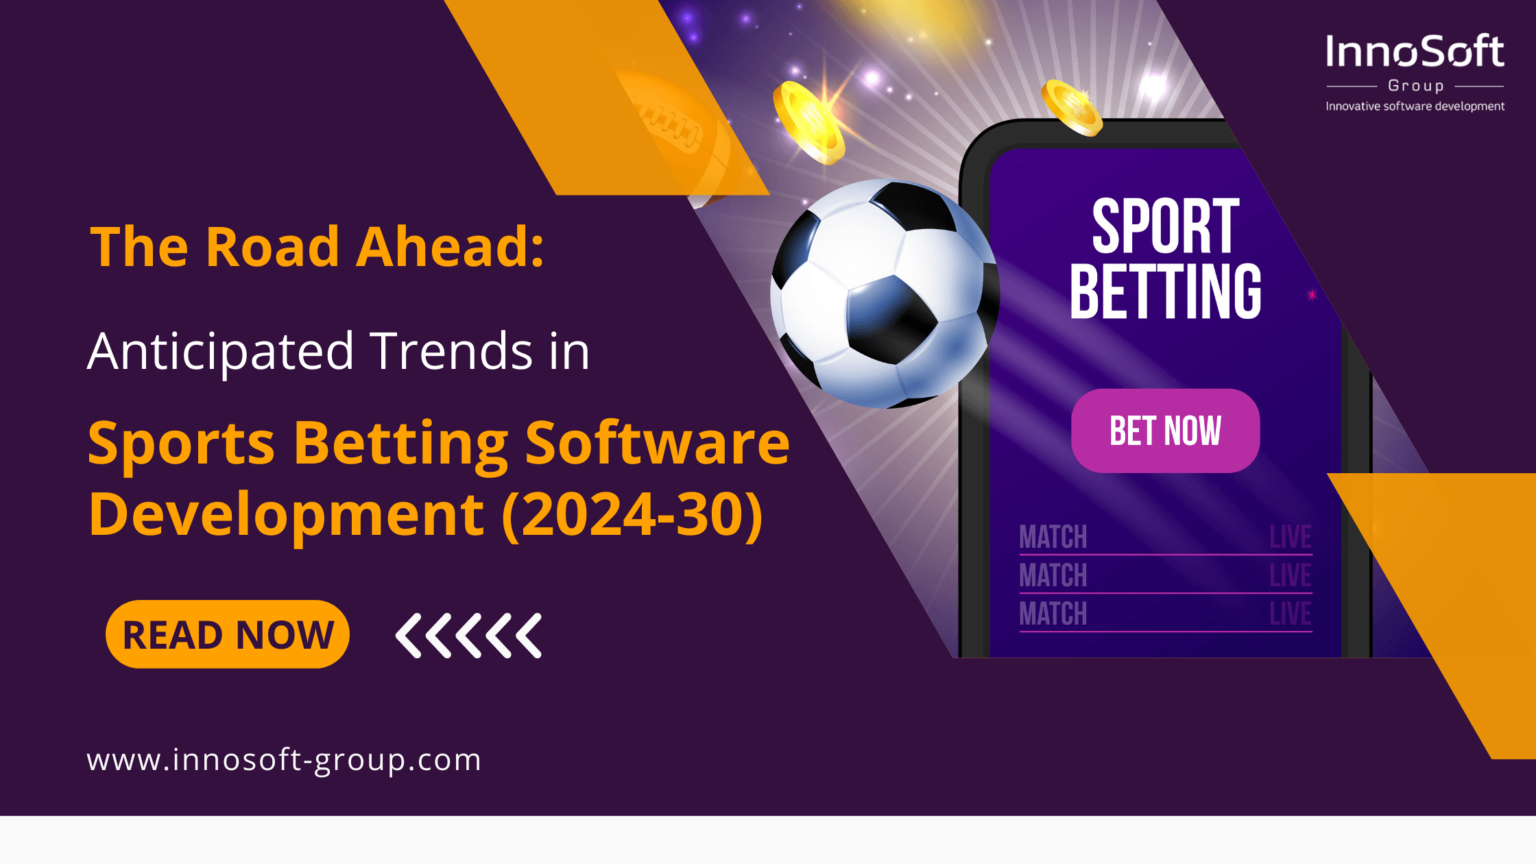 Exciting Trends in Sports Betting Software Development for 202430